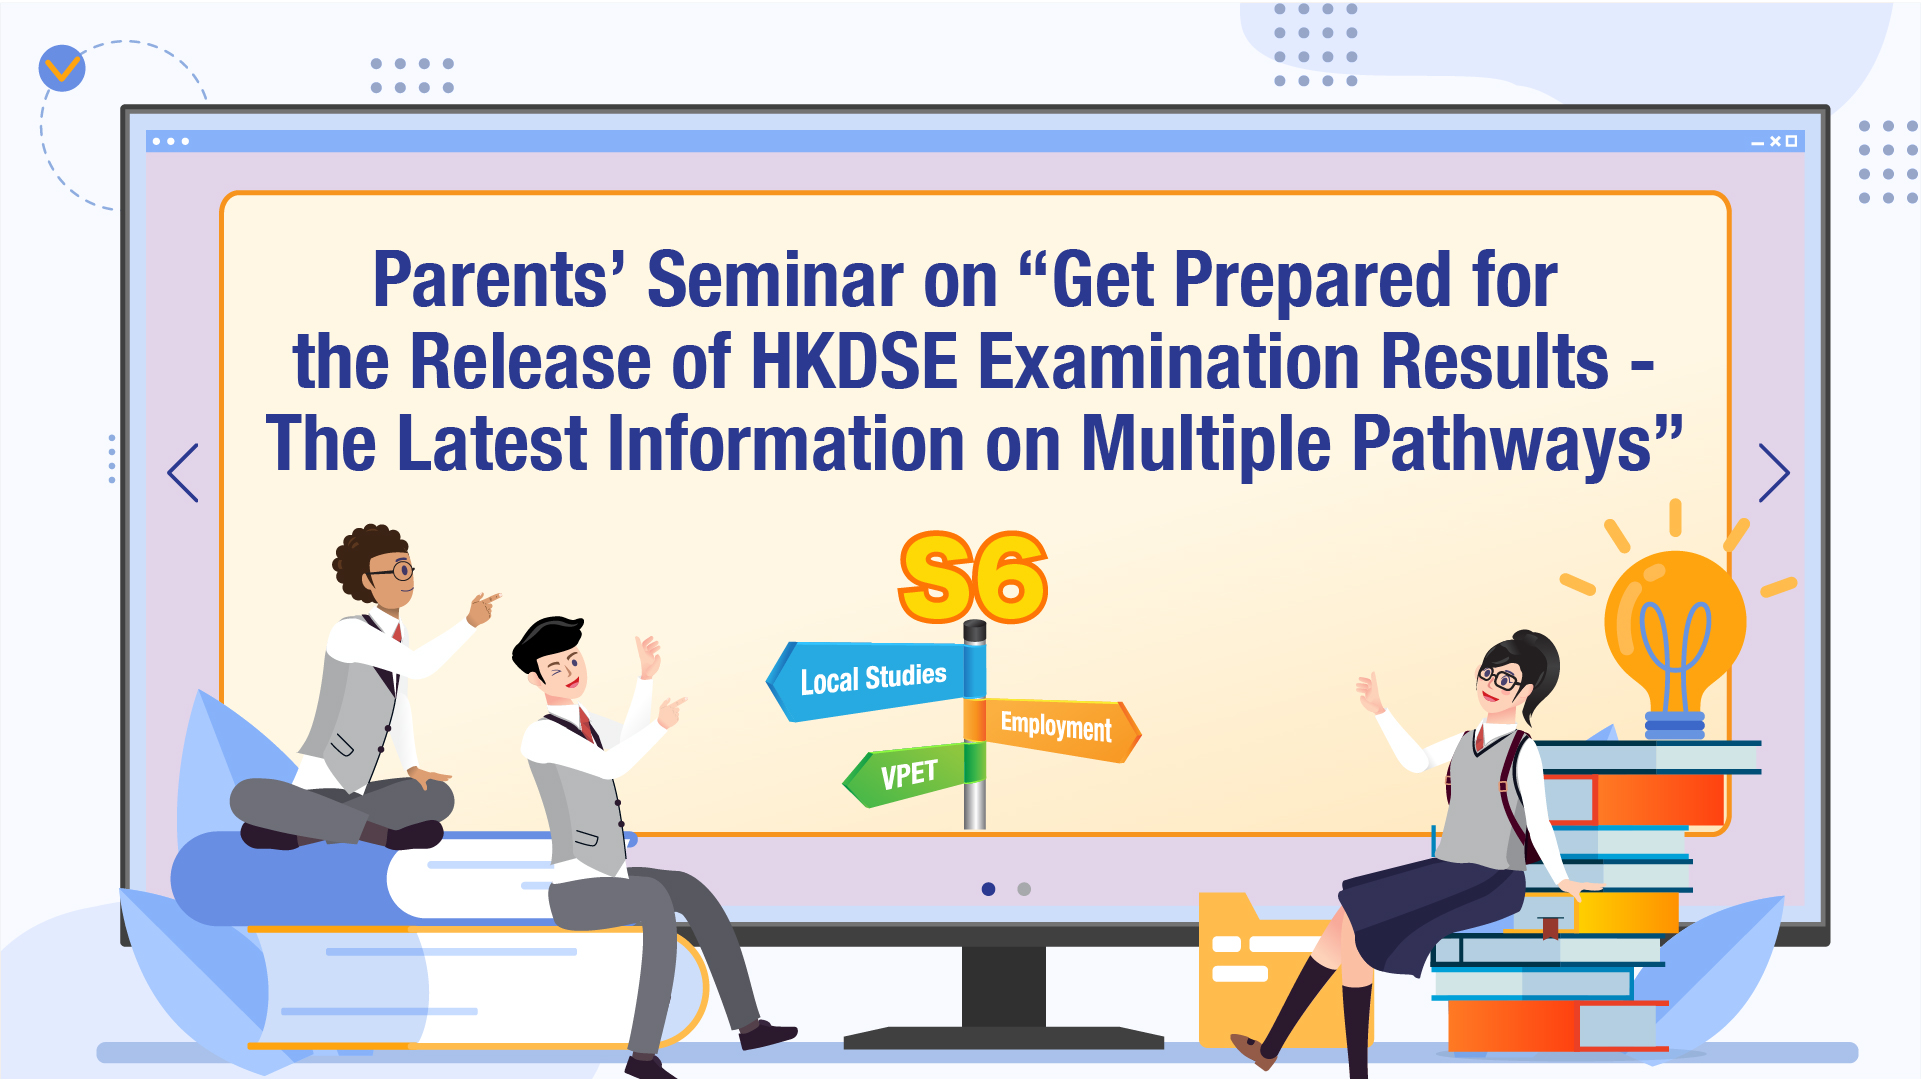 Parents' Seminar (Get Prepared for the Release of HKDSE Examination Results - the Latest Information on Multiple Pathways)